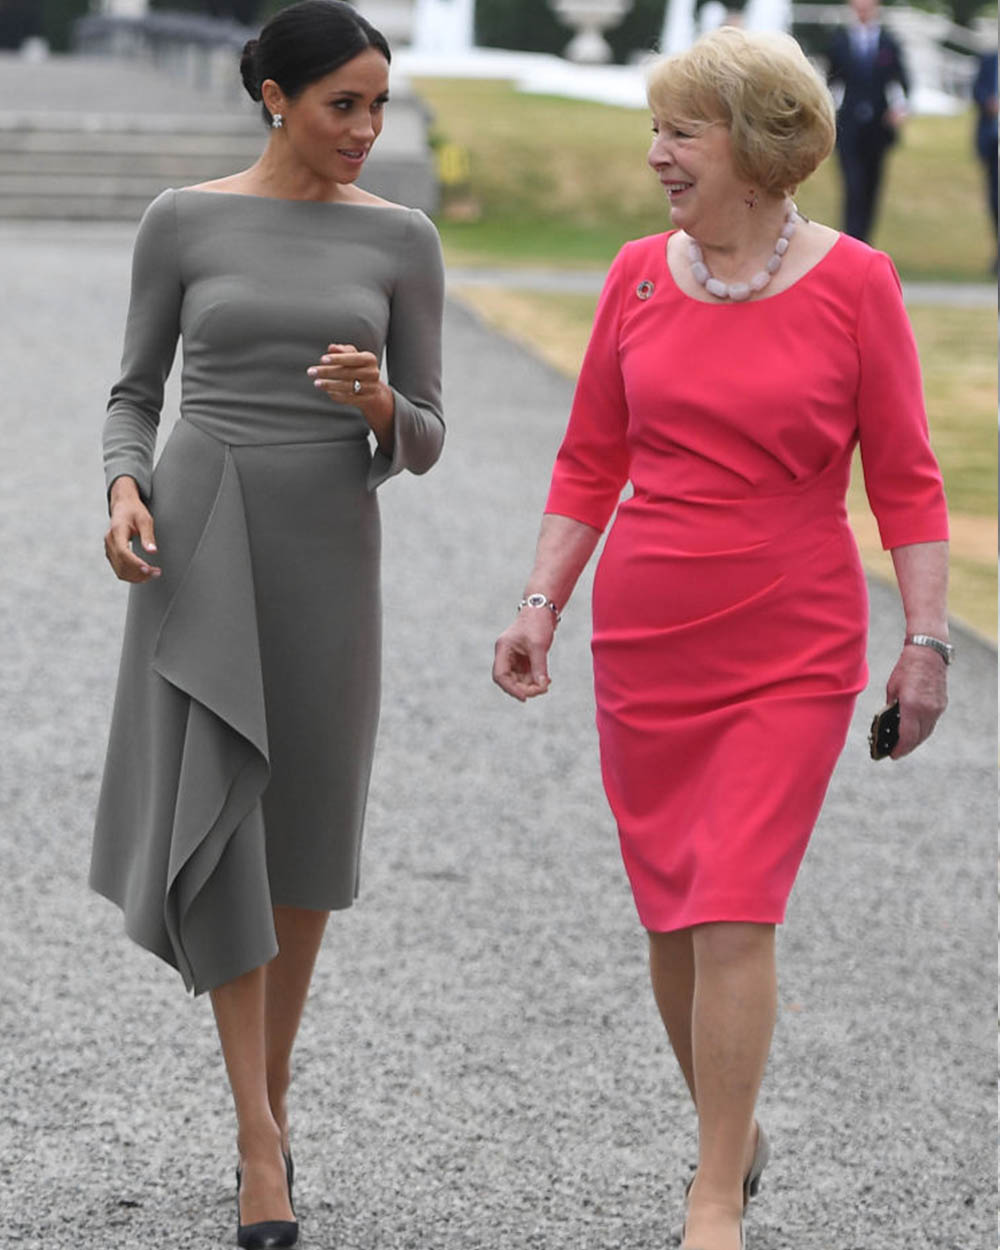 July 11, 2018: Continuing her whirlwind tour of Ireland, Meghan, Duchess of Sussex chats with Sabina Coyne, wife of the Irish President Michael Higgins wearing a grey Roland Mouret dress featuring a draped asymmetric skirt and -unsurprisingly -  a boatneck neckline.